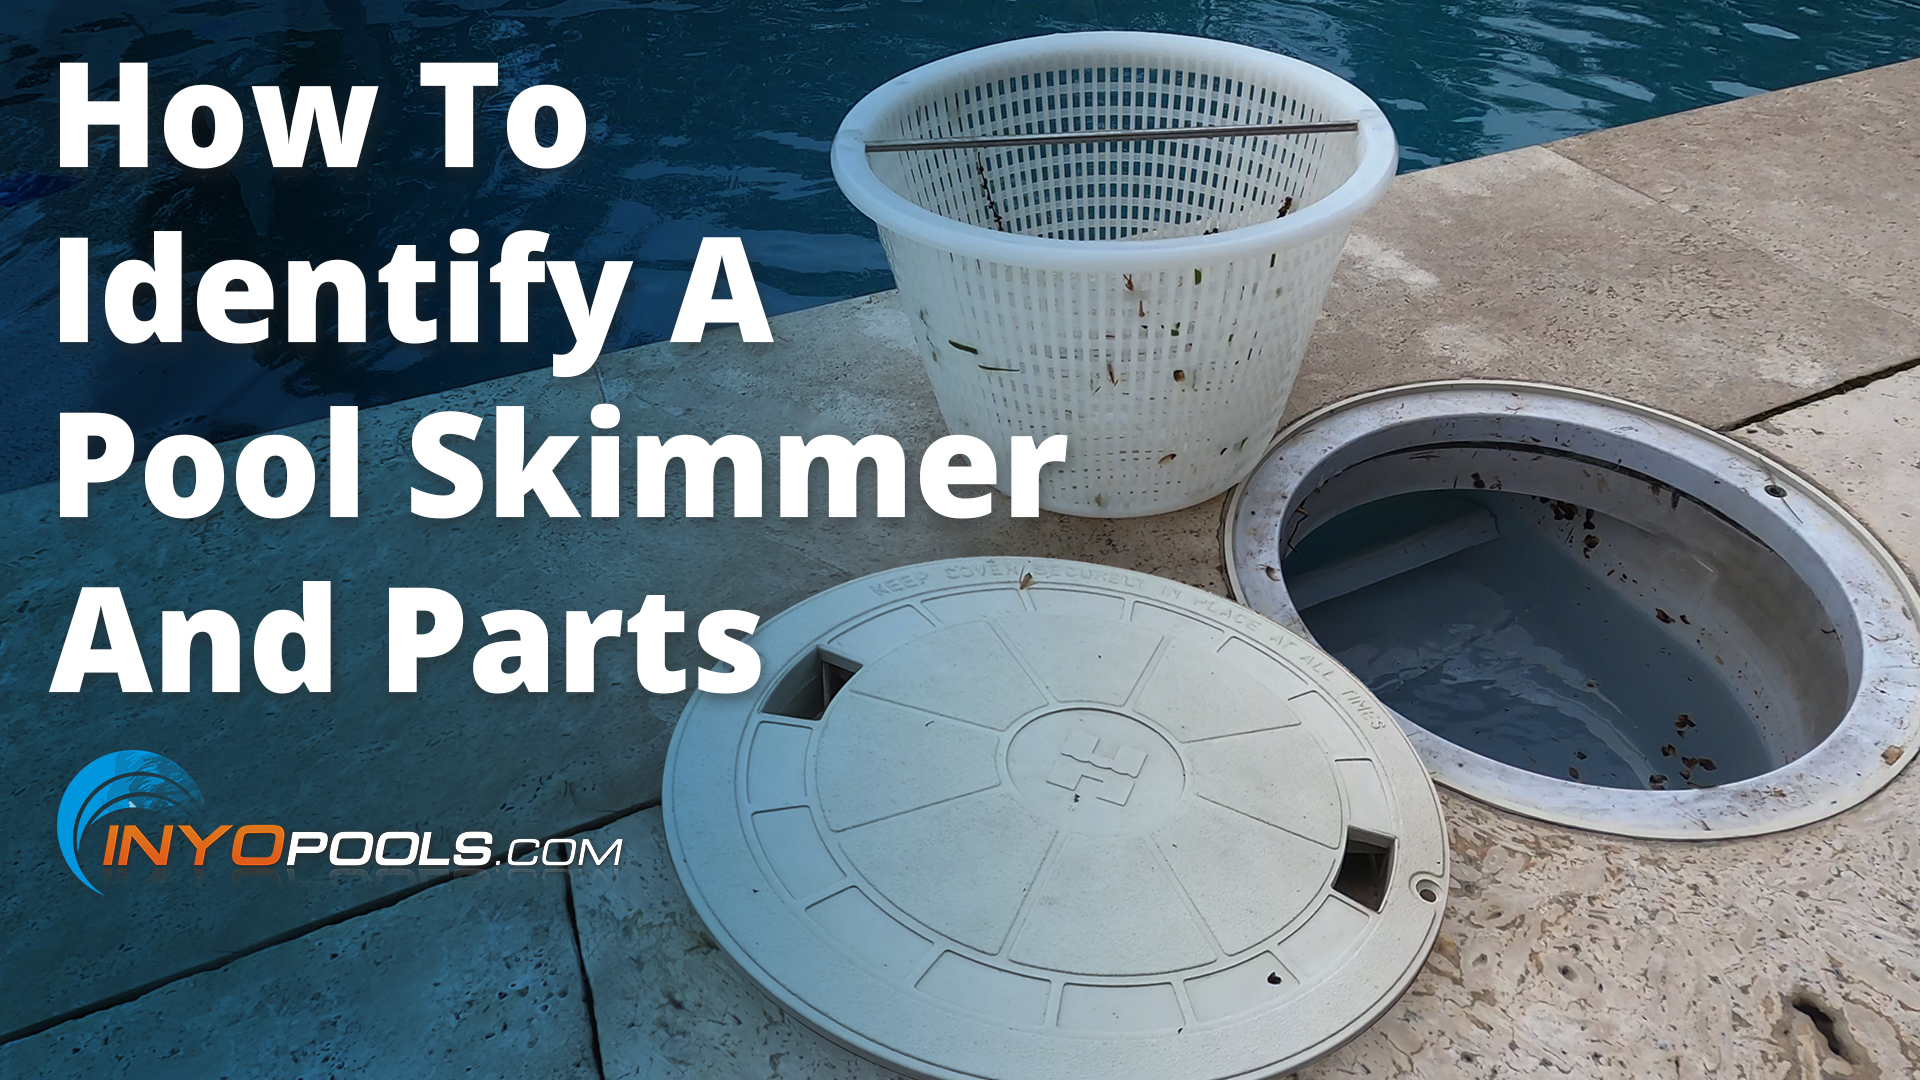 How To Identify A Pool Skimmer And Parts